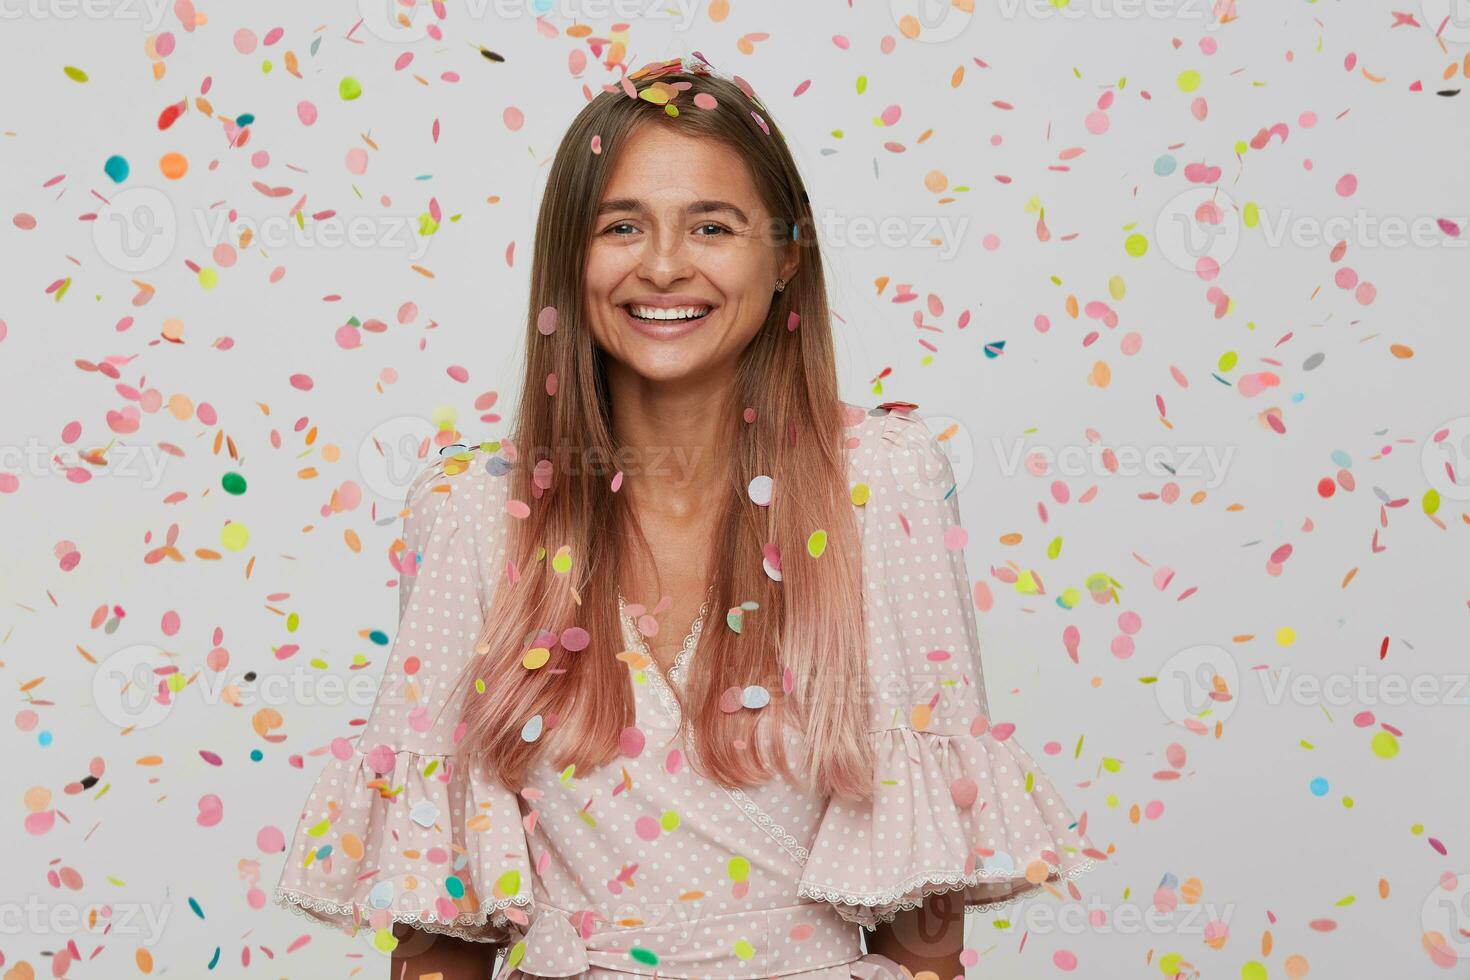 Surprised joyful charming young woman with long dyed pastel pink hair wears polka dot pink dress celebrating birthday, feels happy and laughing isolated over white background with confetti photo